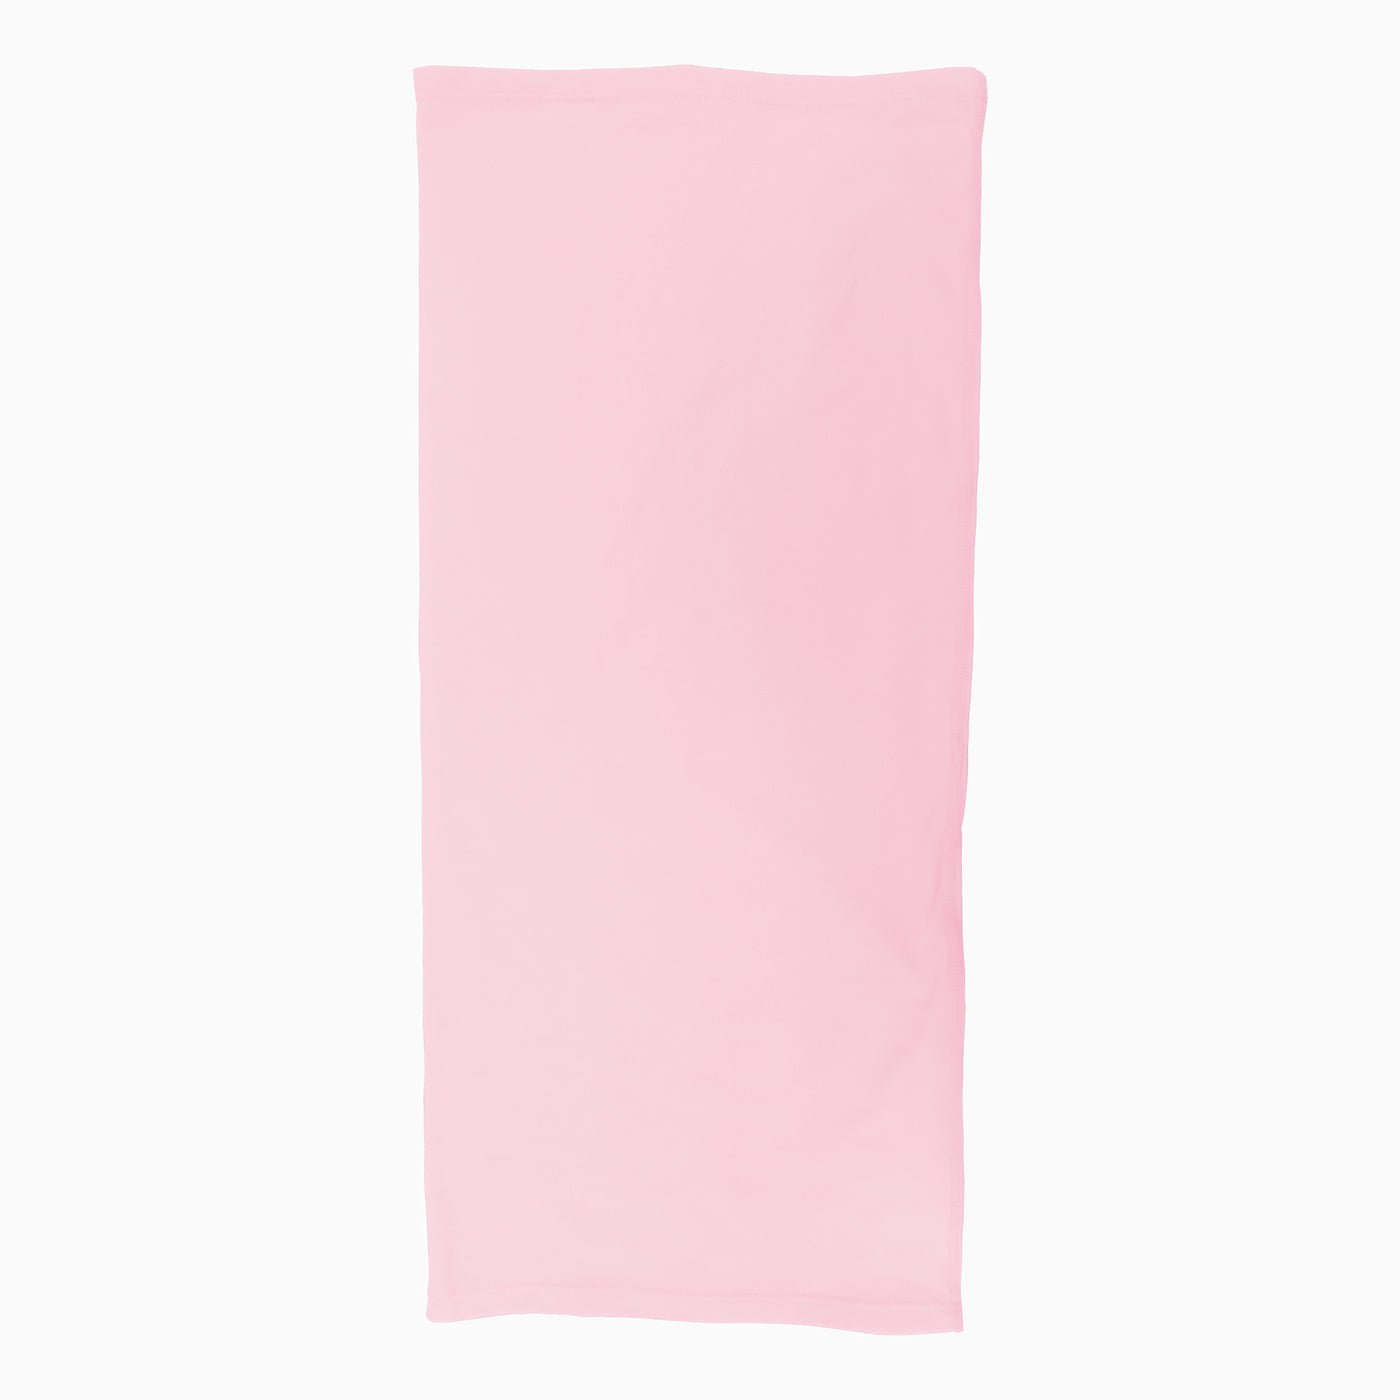 a pink spandex neck gaiter to mask and protect your face